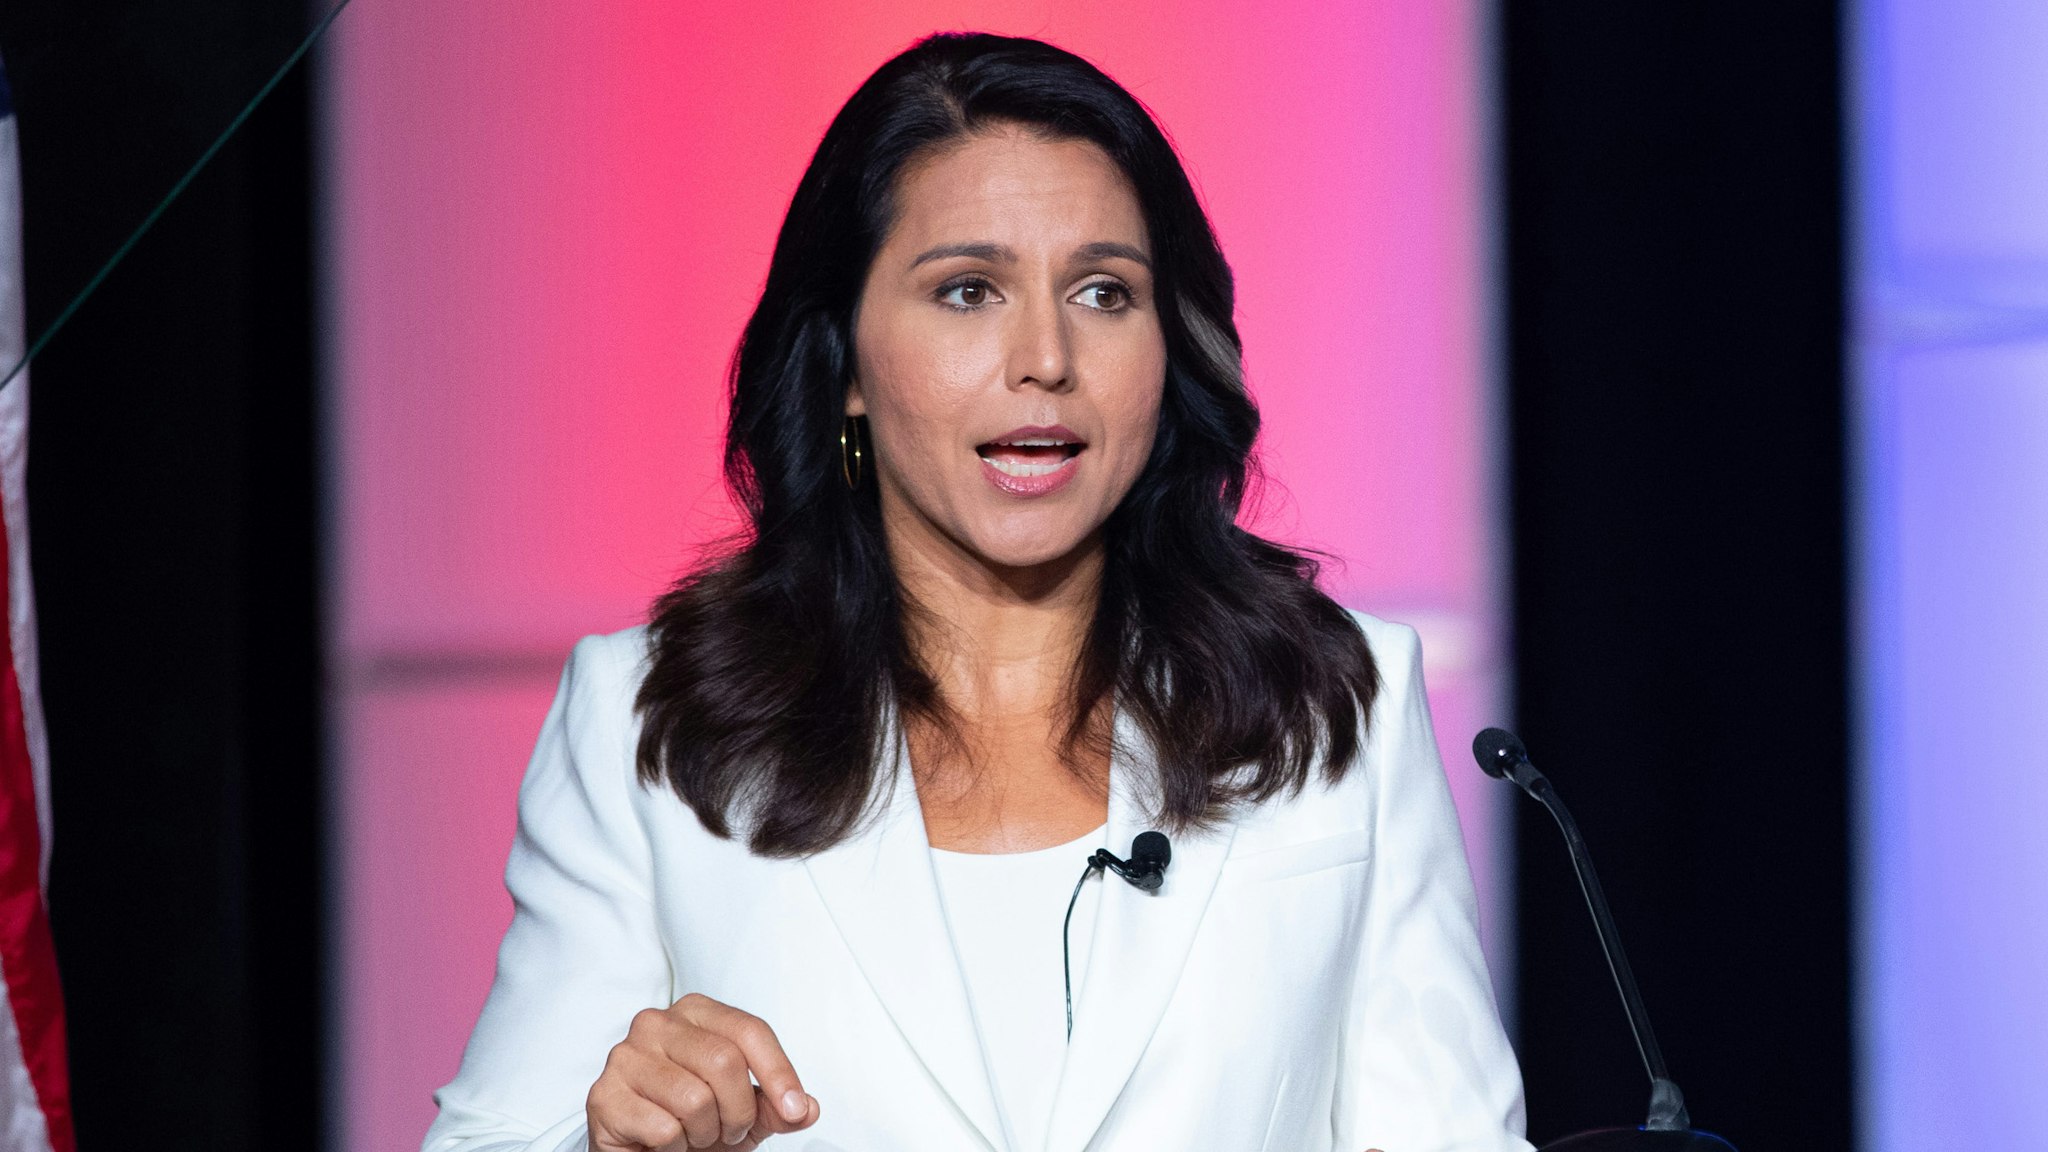 Representative Tulsi Gabbard, a Democrat from Hawaii and 2020 presidential candidate, speaks during the Second Step Presidential Justice Forum at Benedict College in Columbia, South Carolina, U.S., on Sunday, Oct. 27, 2019. The forum asked Democratic presidential candidates to present their criminal justice reform platforms now that the First Step Act has been passed.